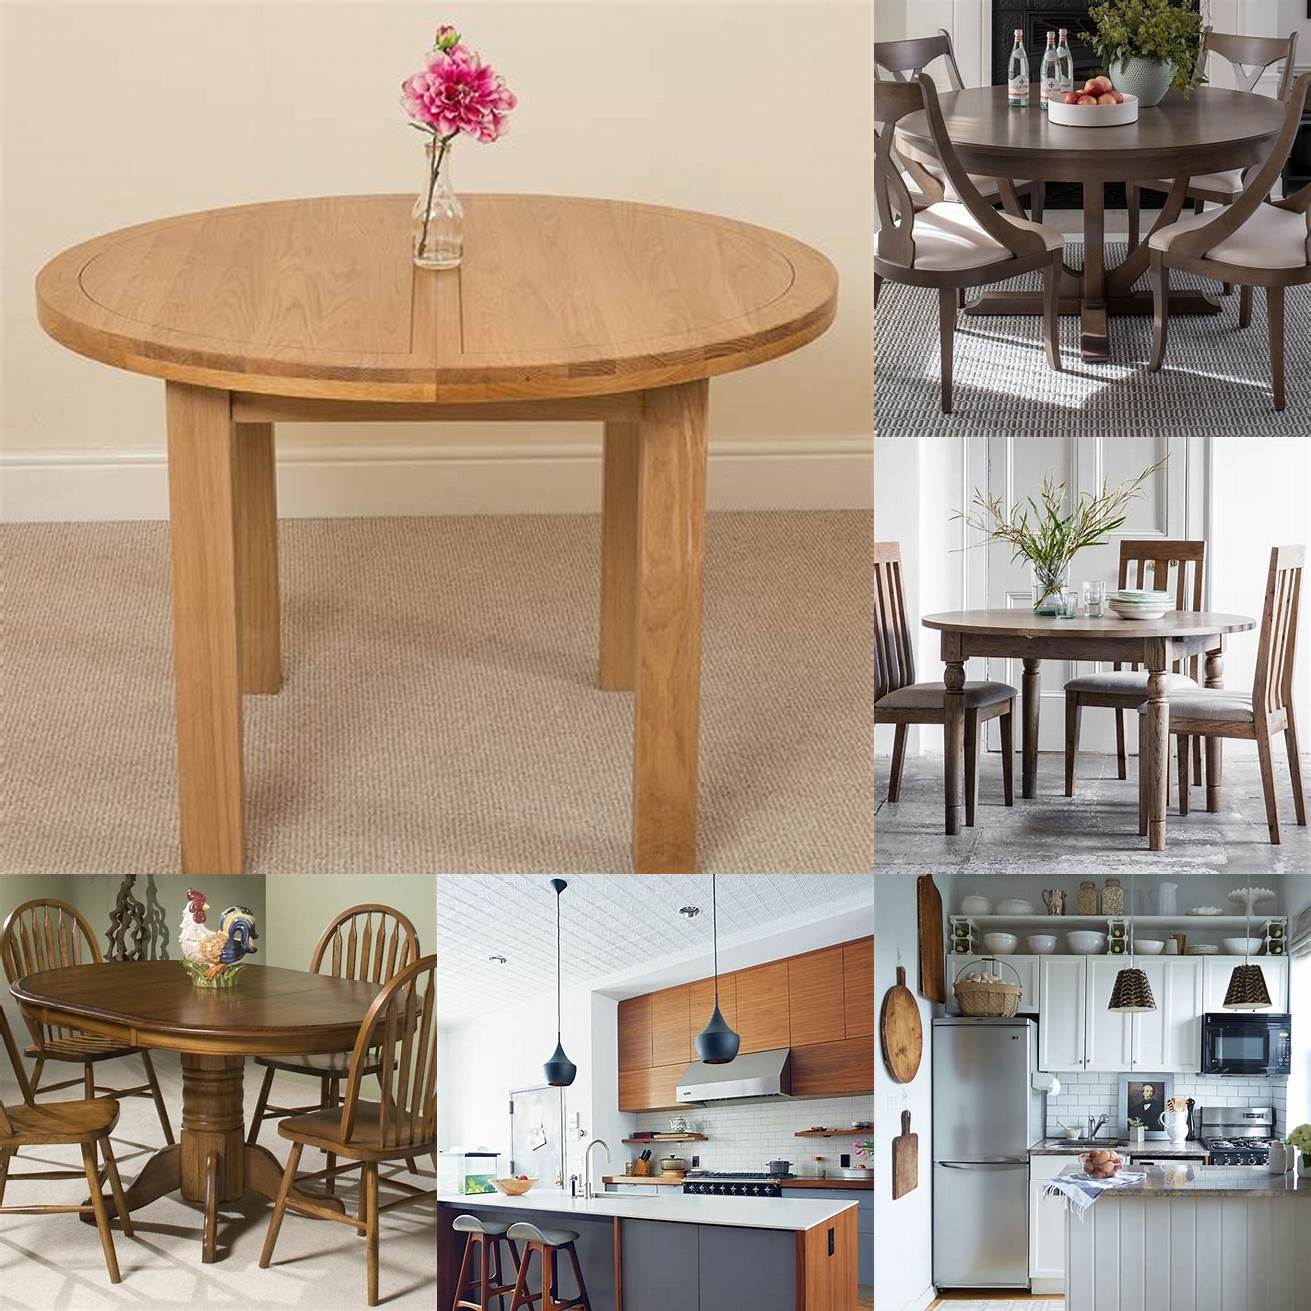 A round table is a classic choice for small kitchens and creates a sense of intimacy